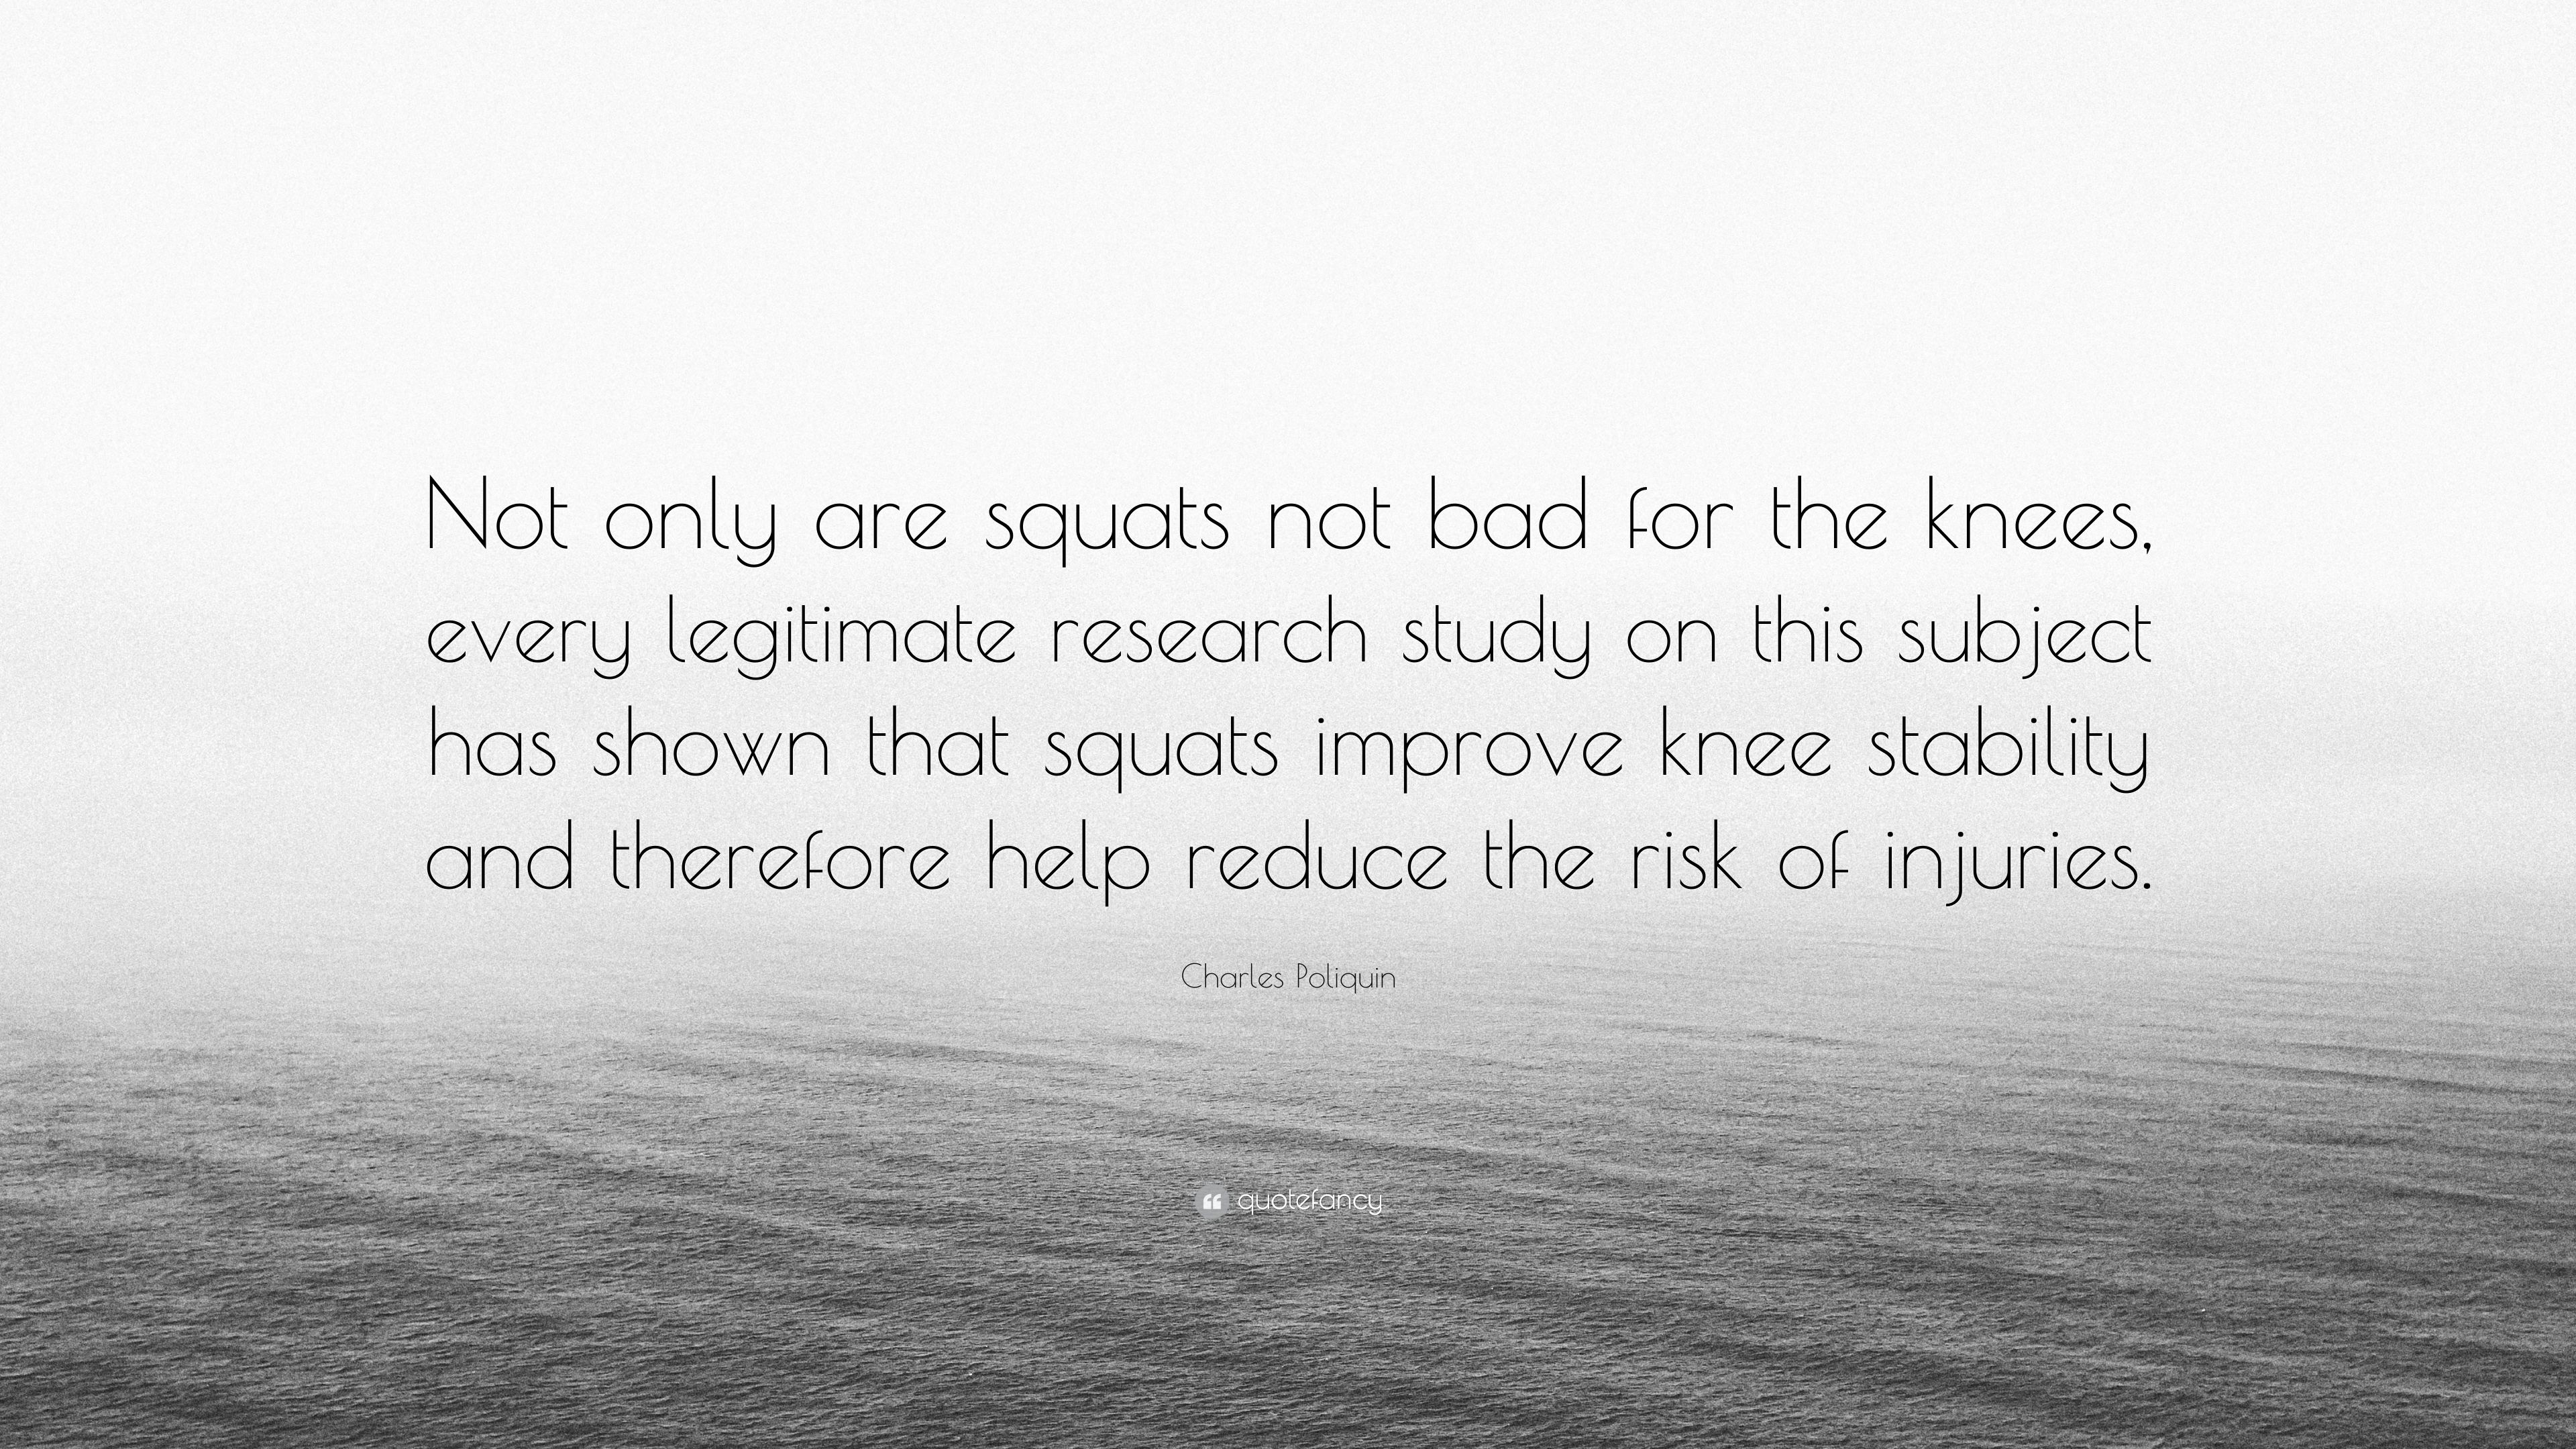 Charles Poliquin Quote: “Not only are squats not bad for